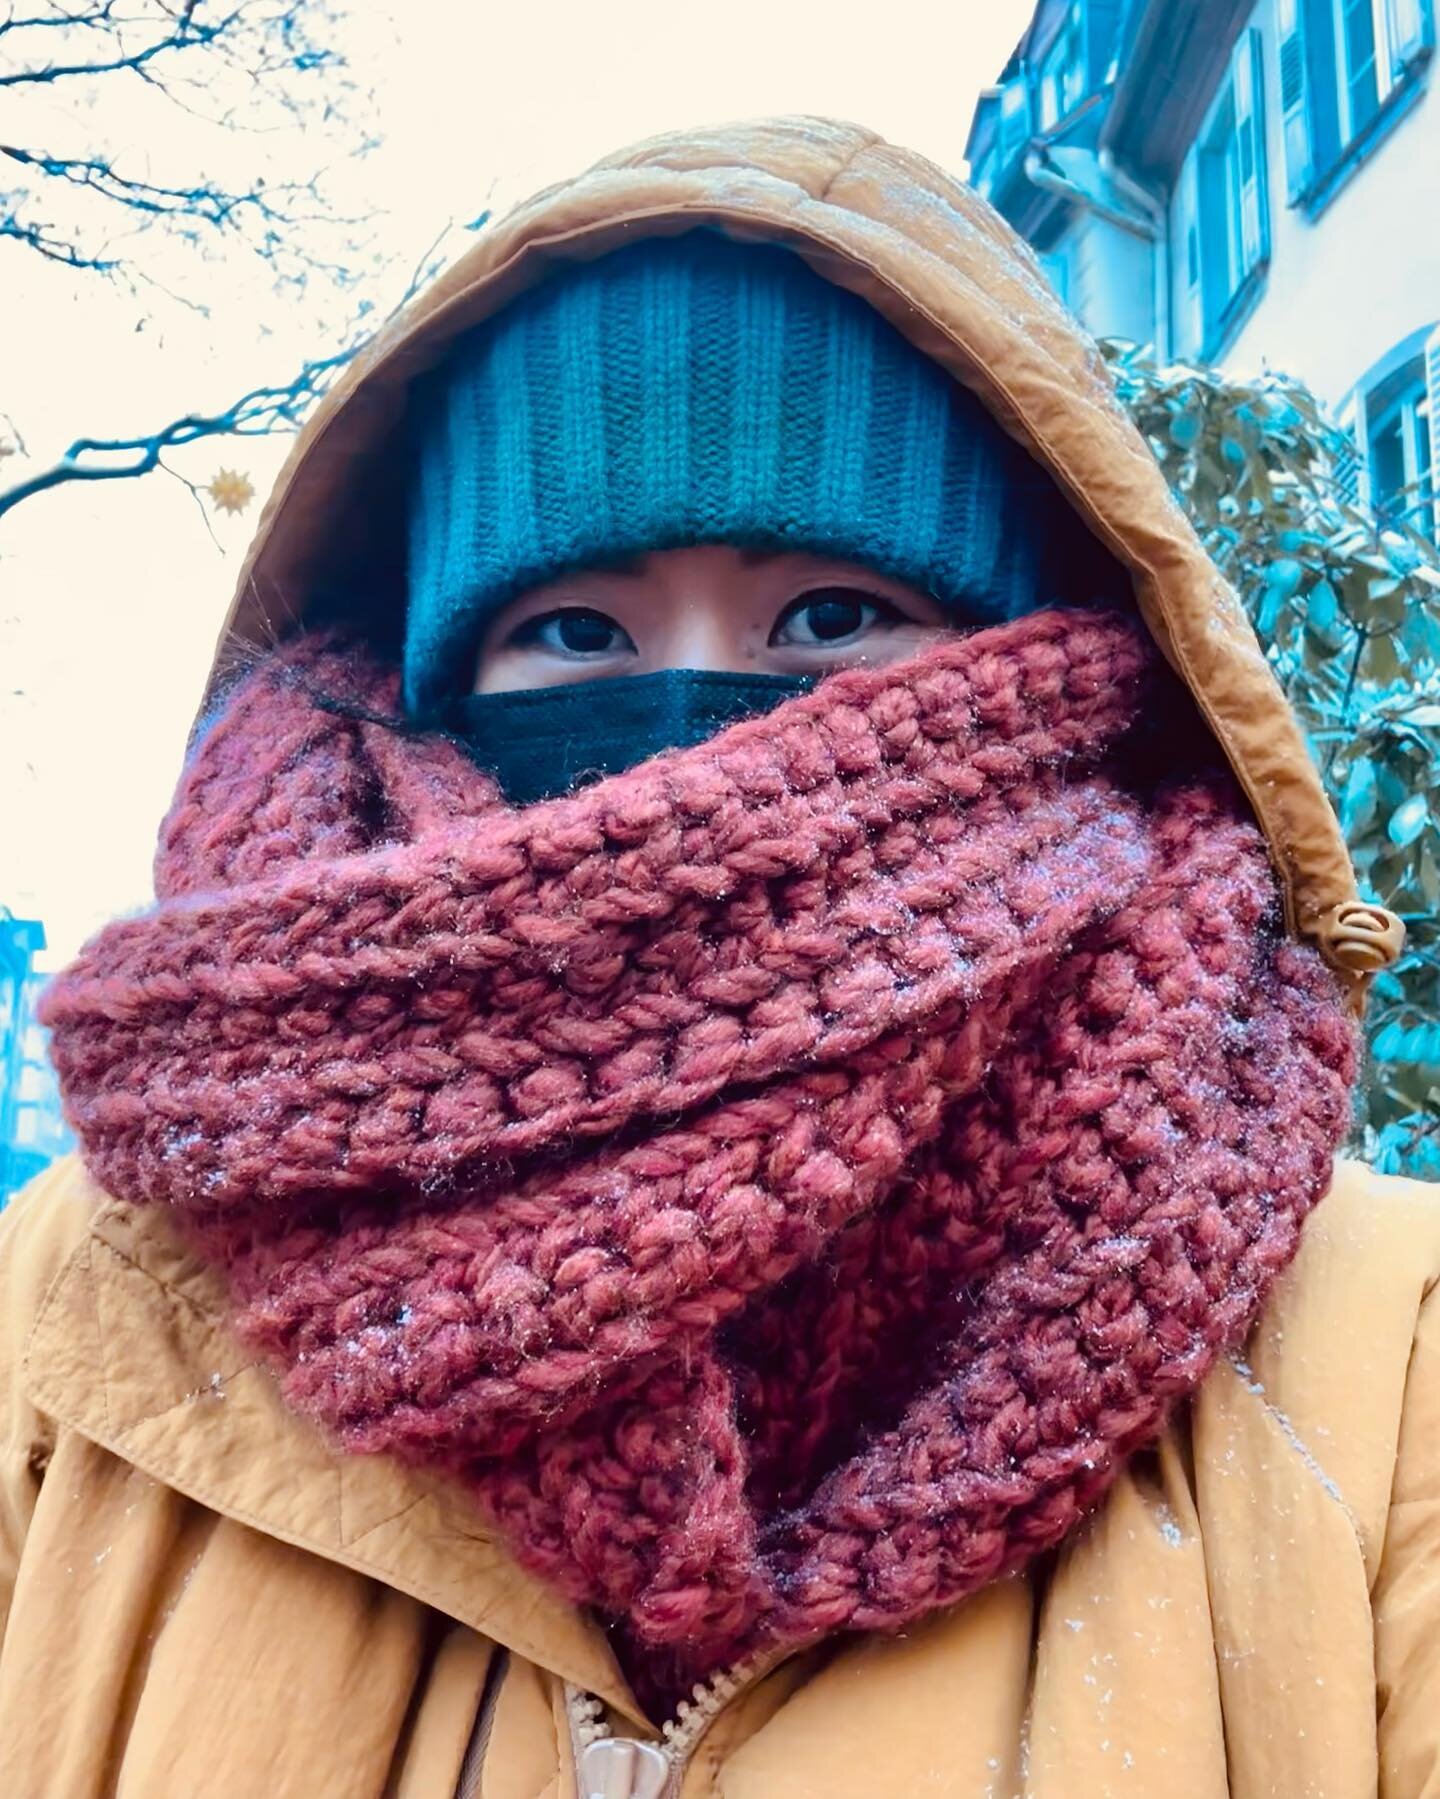 Crochet the cold away❄️🌨️
&bull;
I made this scarf for my trip and it was worth every stitch🧶